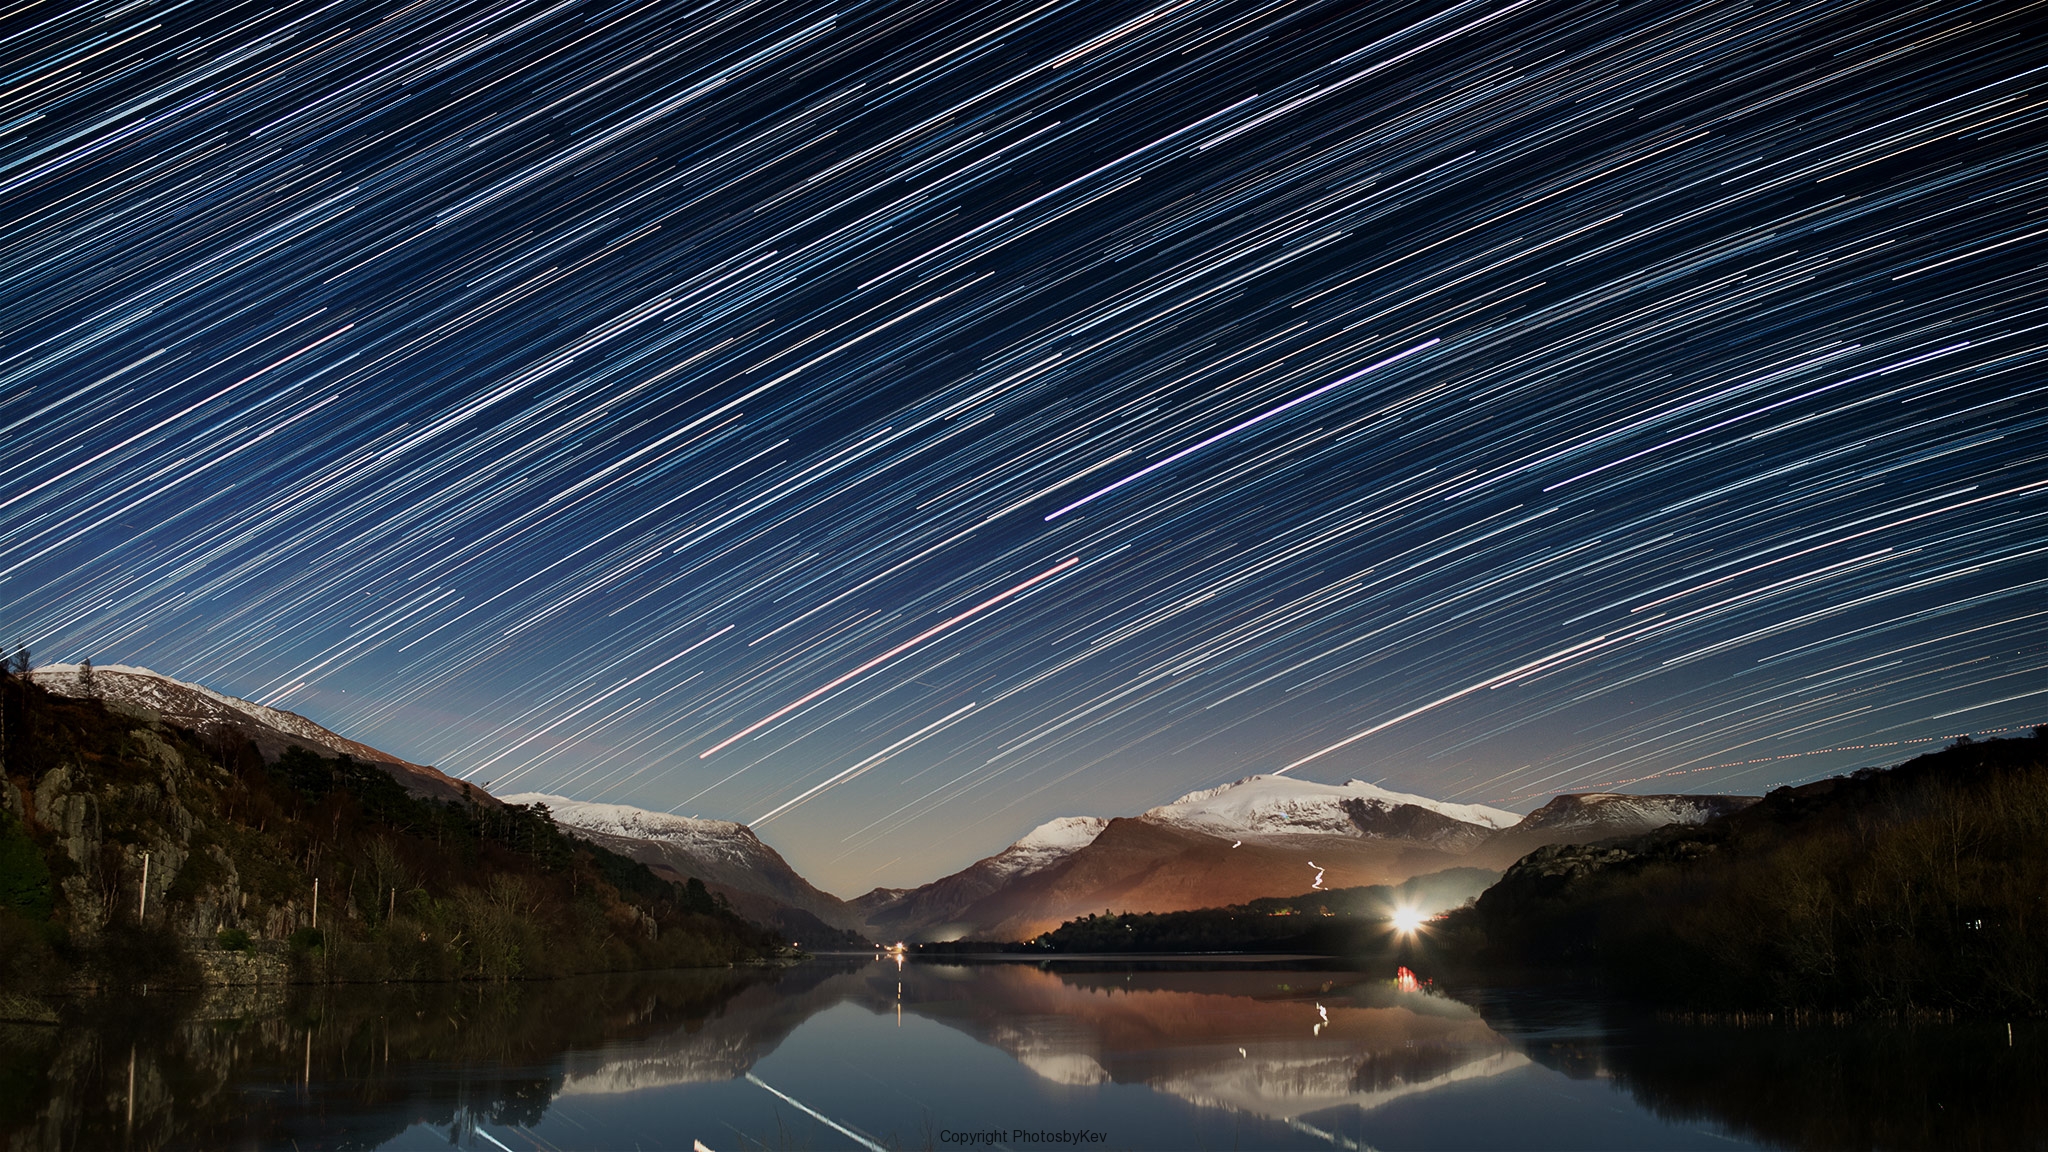 Star Trail Pics, Earth Collection